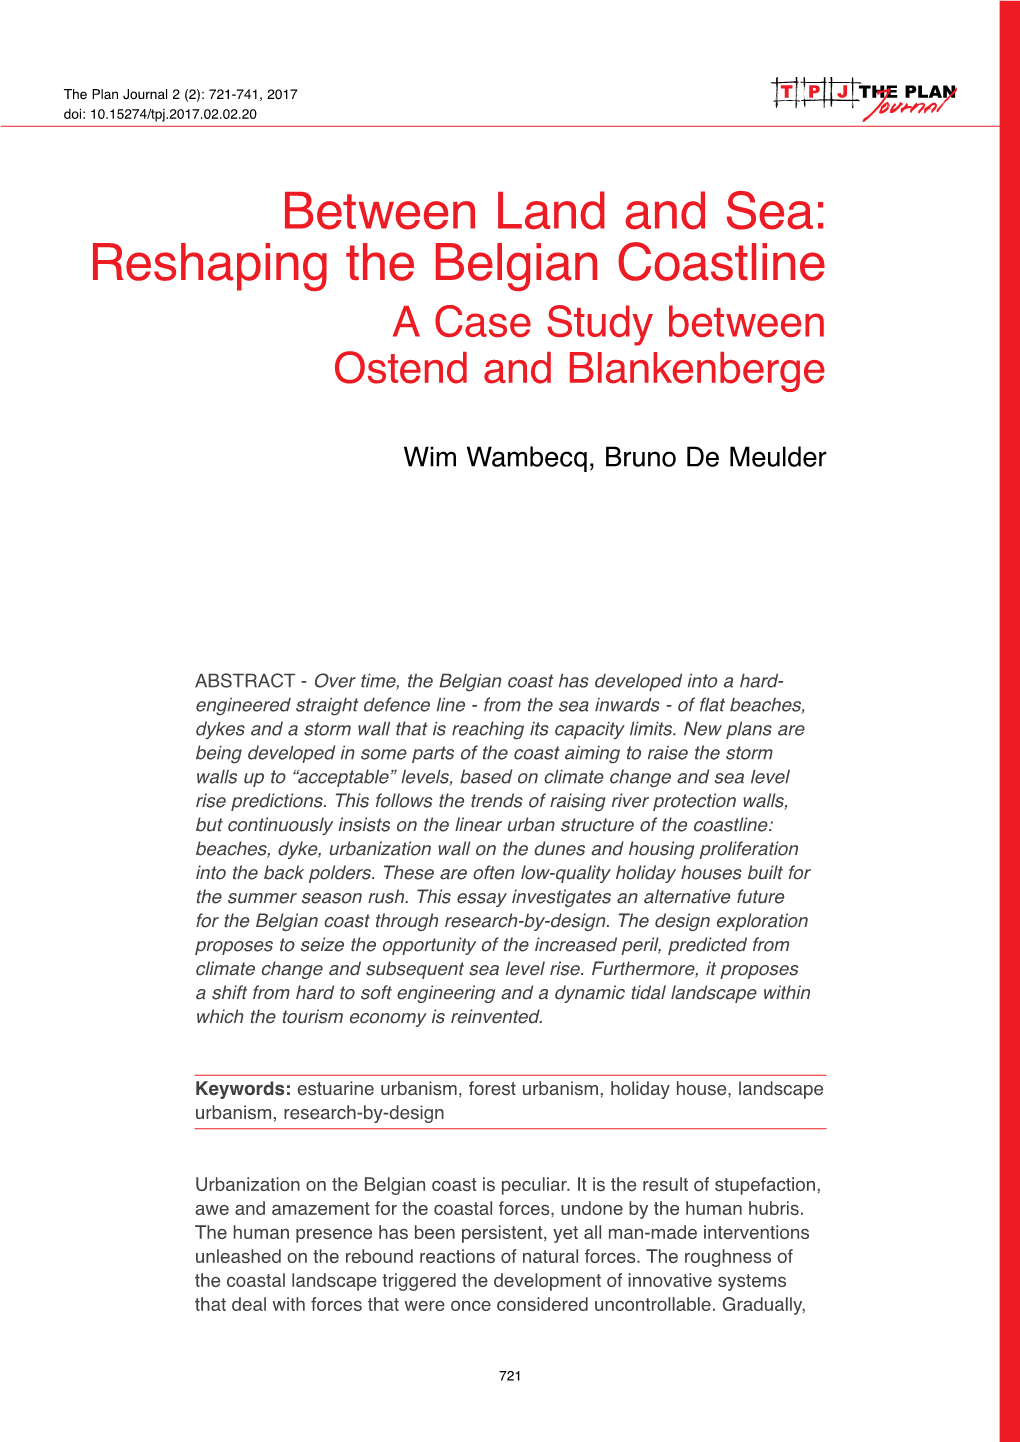 Between Land and Sea: Reshaping the Belgian Coastline a Case Study Between Ostend and Blankenberge